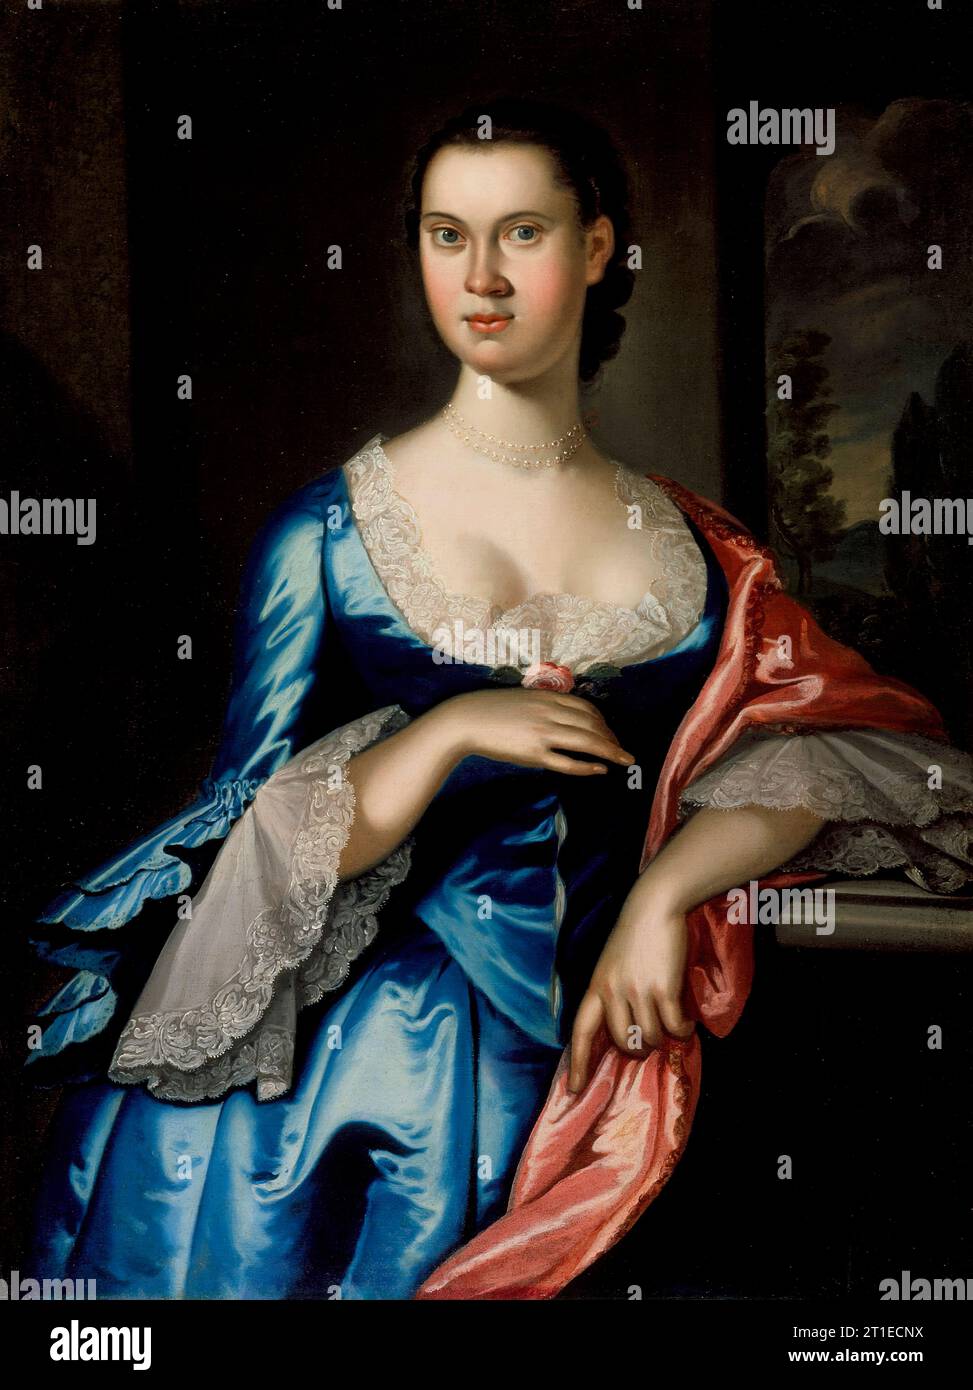 Portrait of Elizabeth Chew Smith, 1762.The subject was born in 1742 or 1743, the daughter of Samuel Chew III of Anne Arundel County and his wife Sarah Lock. Since Elizabeth Chew was married on February 11, 1762, it is possible that the present painting was a marriage portrait. Her first husband was John Hamilton Smith, a resident and plantation owner of Calvert County; they had two daughters, Elizabeth Chew and Mary. Records for Saint James&#x2019;s (Old Herring Creek) Parish show a large family with the name of Smith living there in the early eighteenth century. Elizabeth Chew Smith later mar Stock Photo